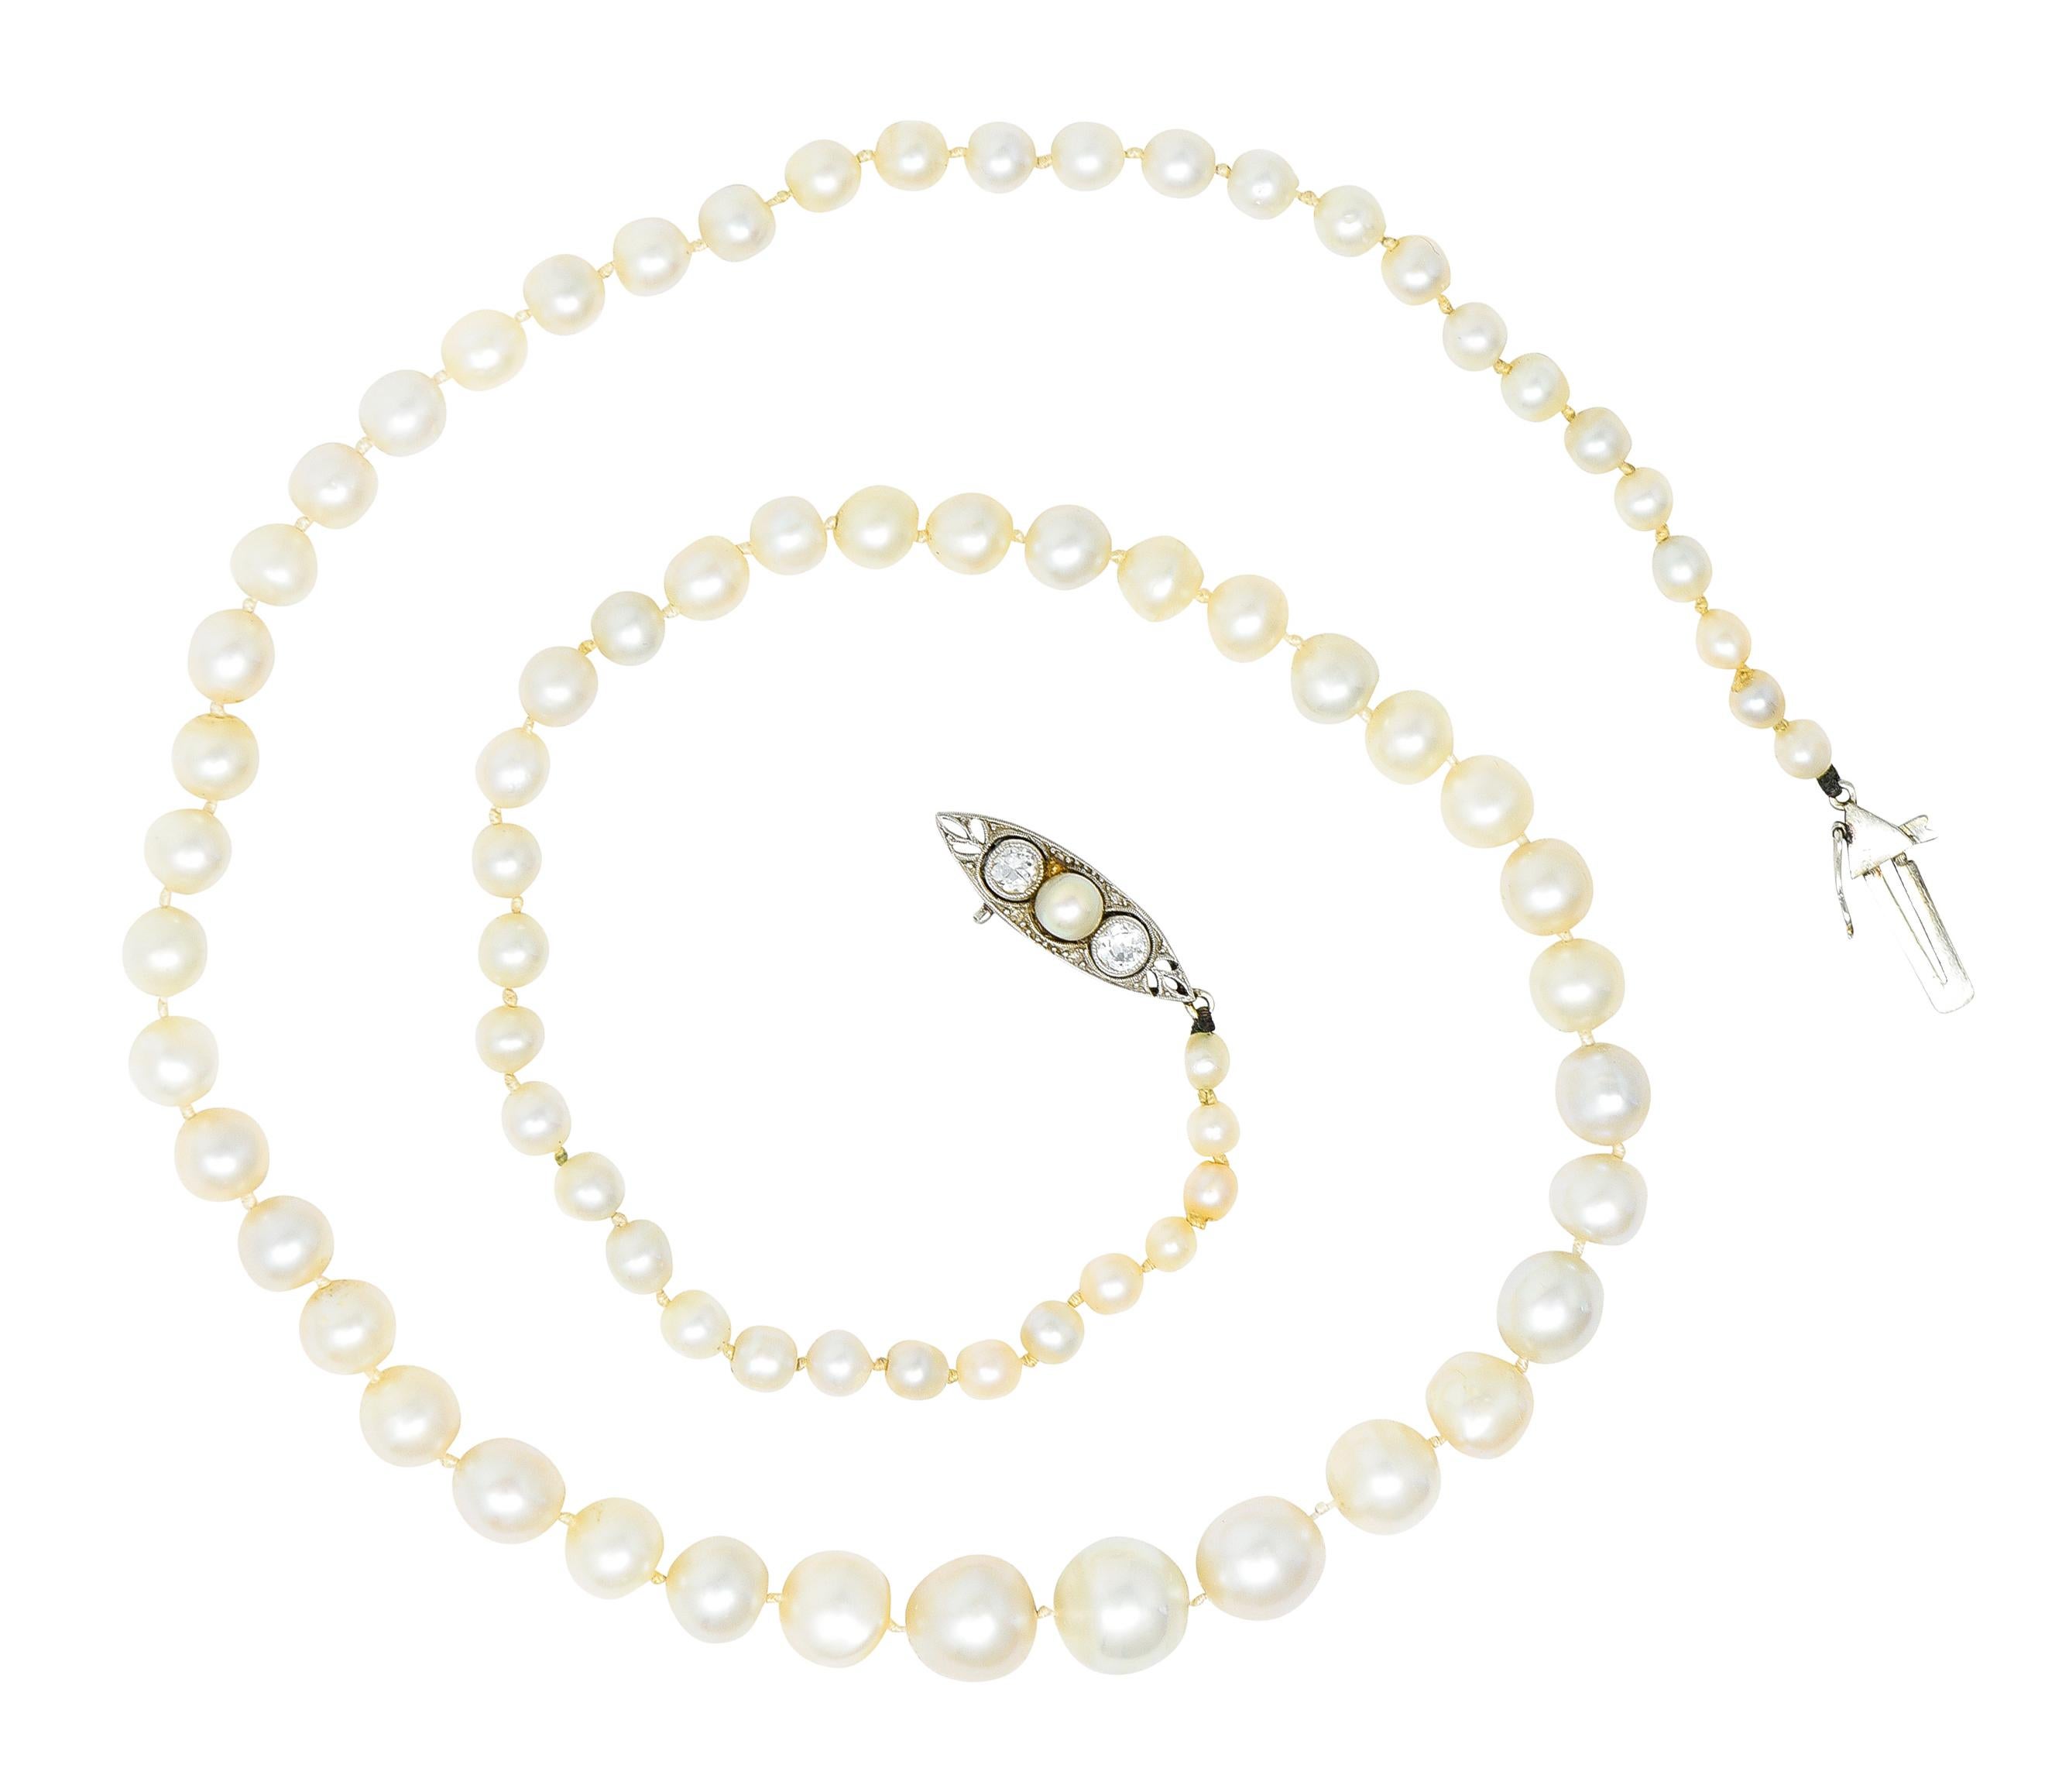 Strand necklace is comprised of natural saltwater pearls - hand knotted

Graduating in size from 8.5 mm to 3.0 mm and well matched in cream body color

Featuring moderate to strong rosè overtones while some exhibit strong iridescence

With very good